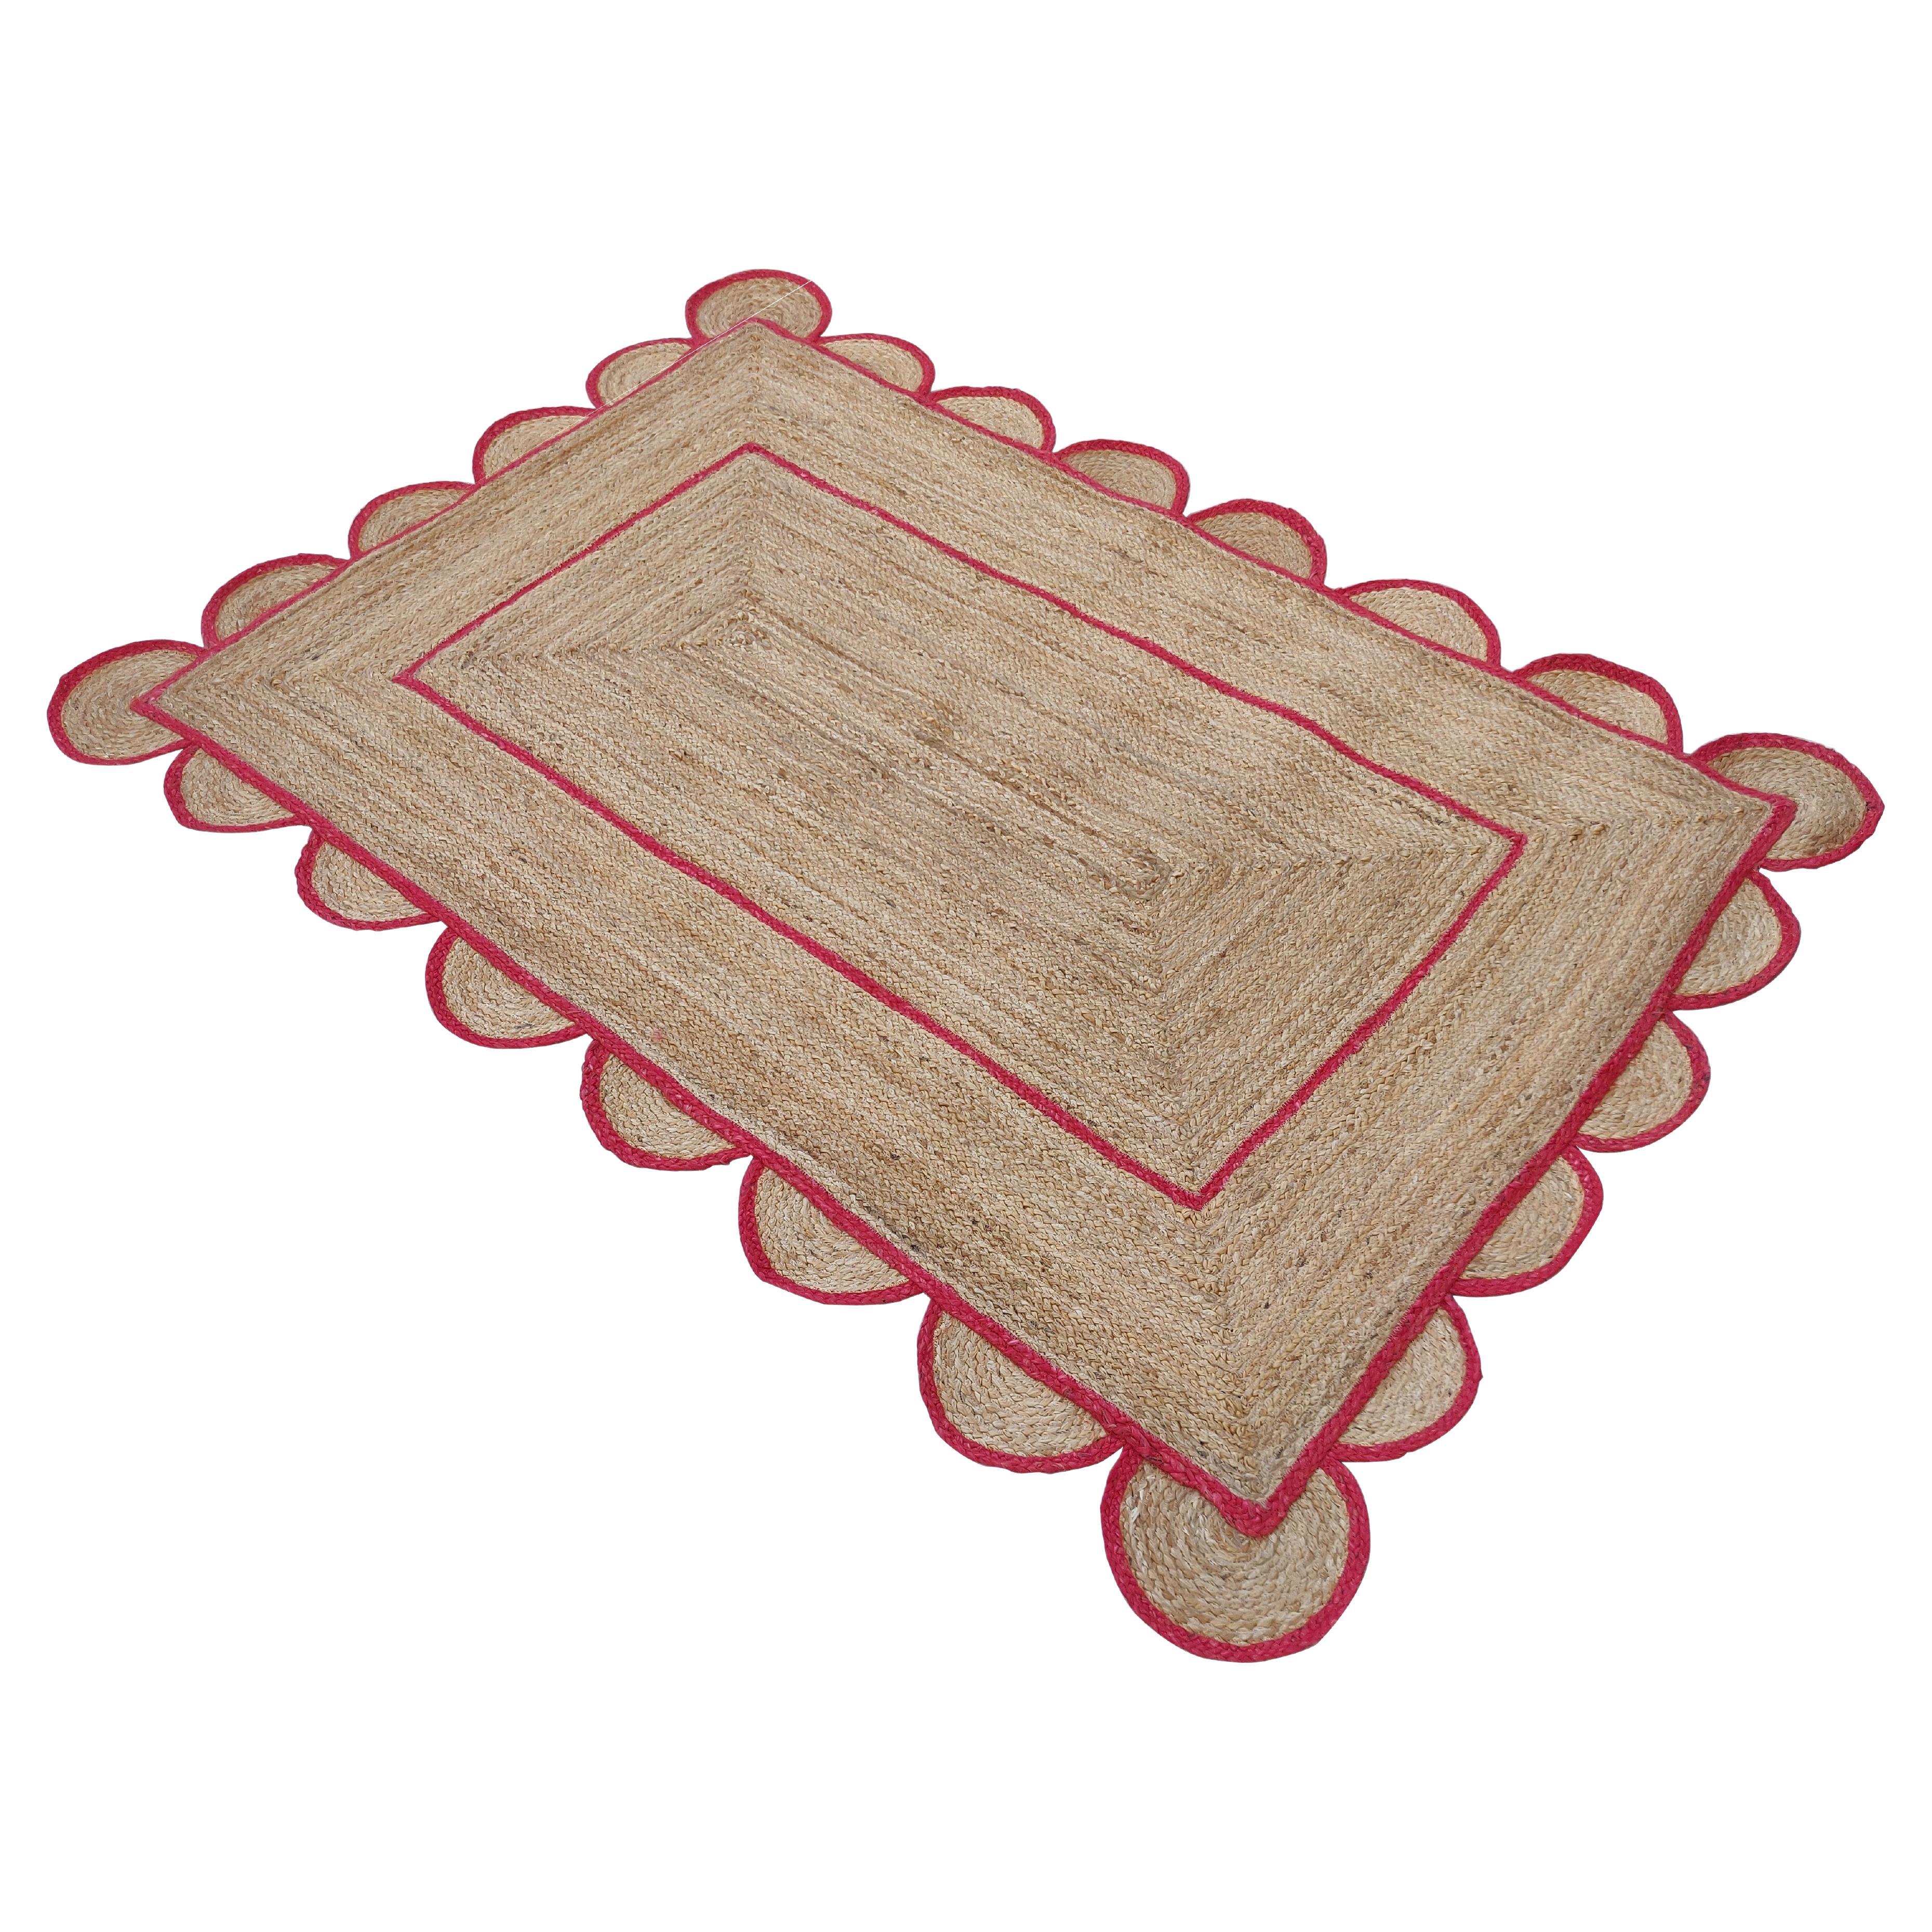 Handmade Jute Area Flat Weave Rug, 4x6 Red And Jute Scalloped Indian Dhurrie Rug For Sale